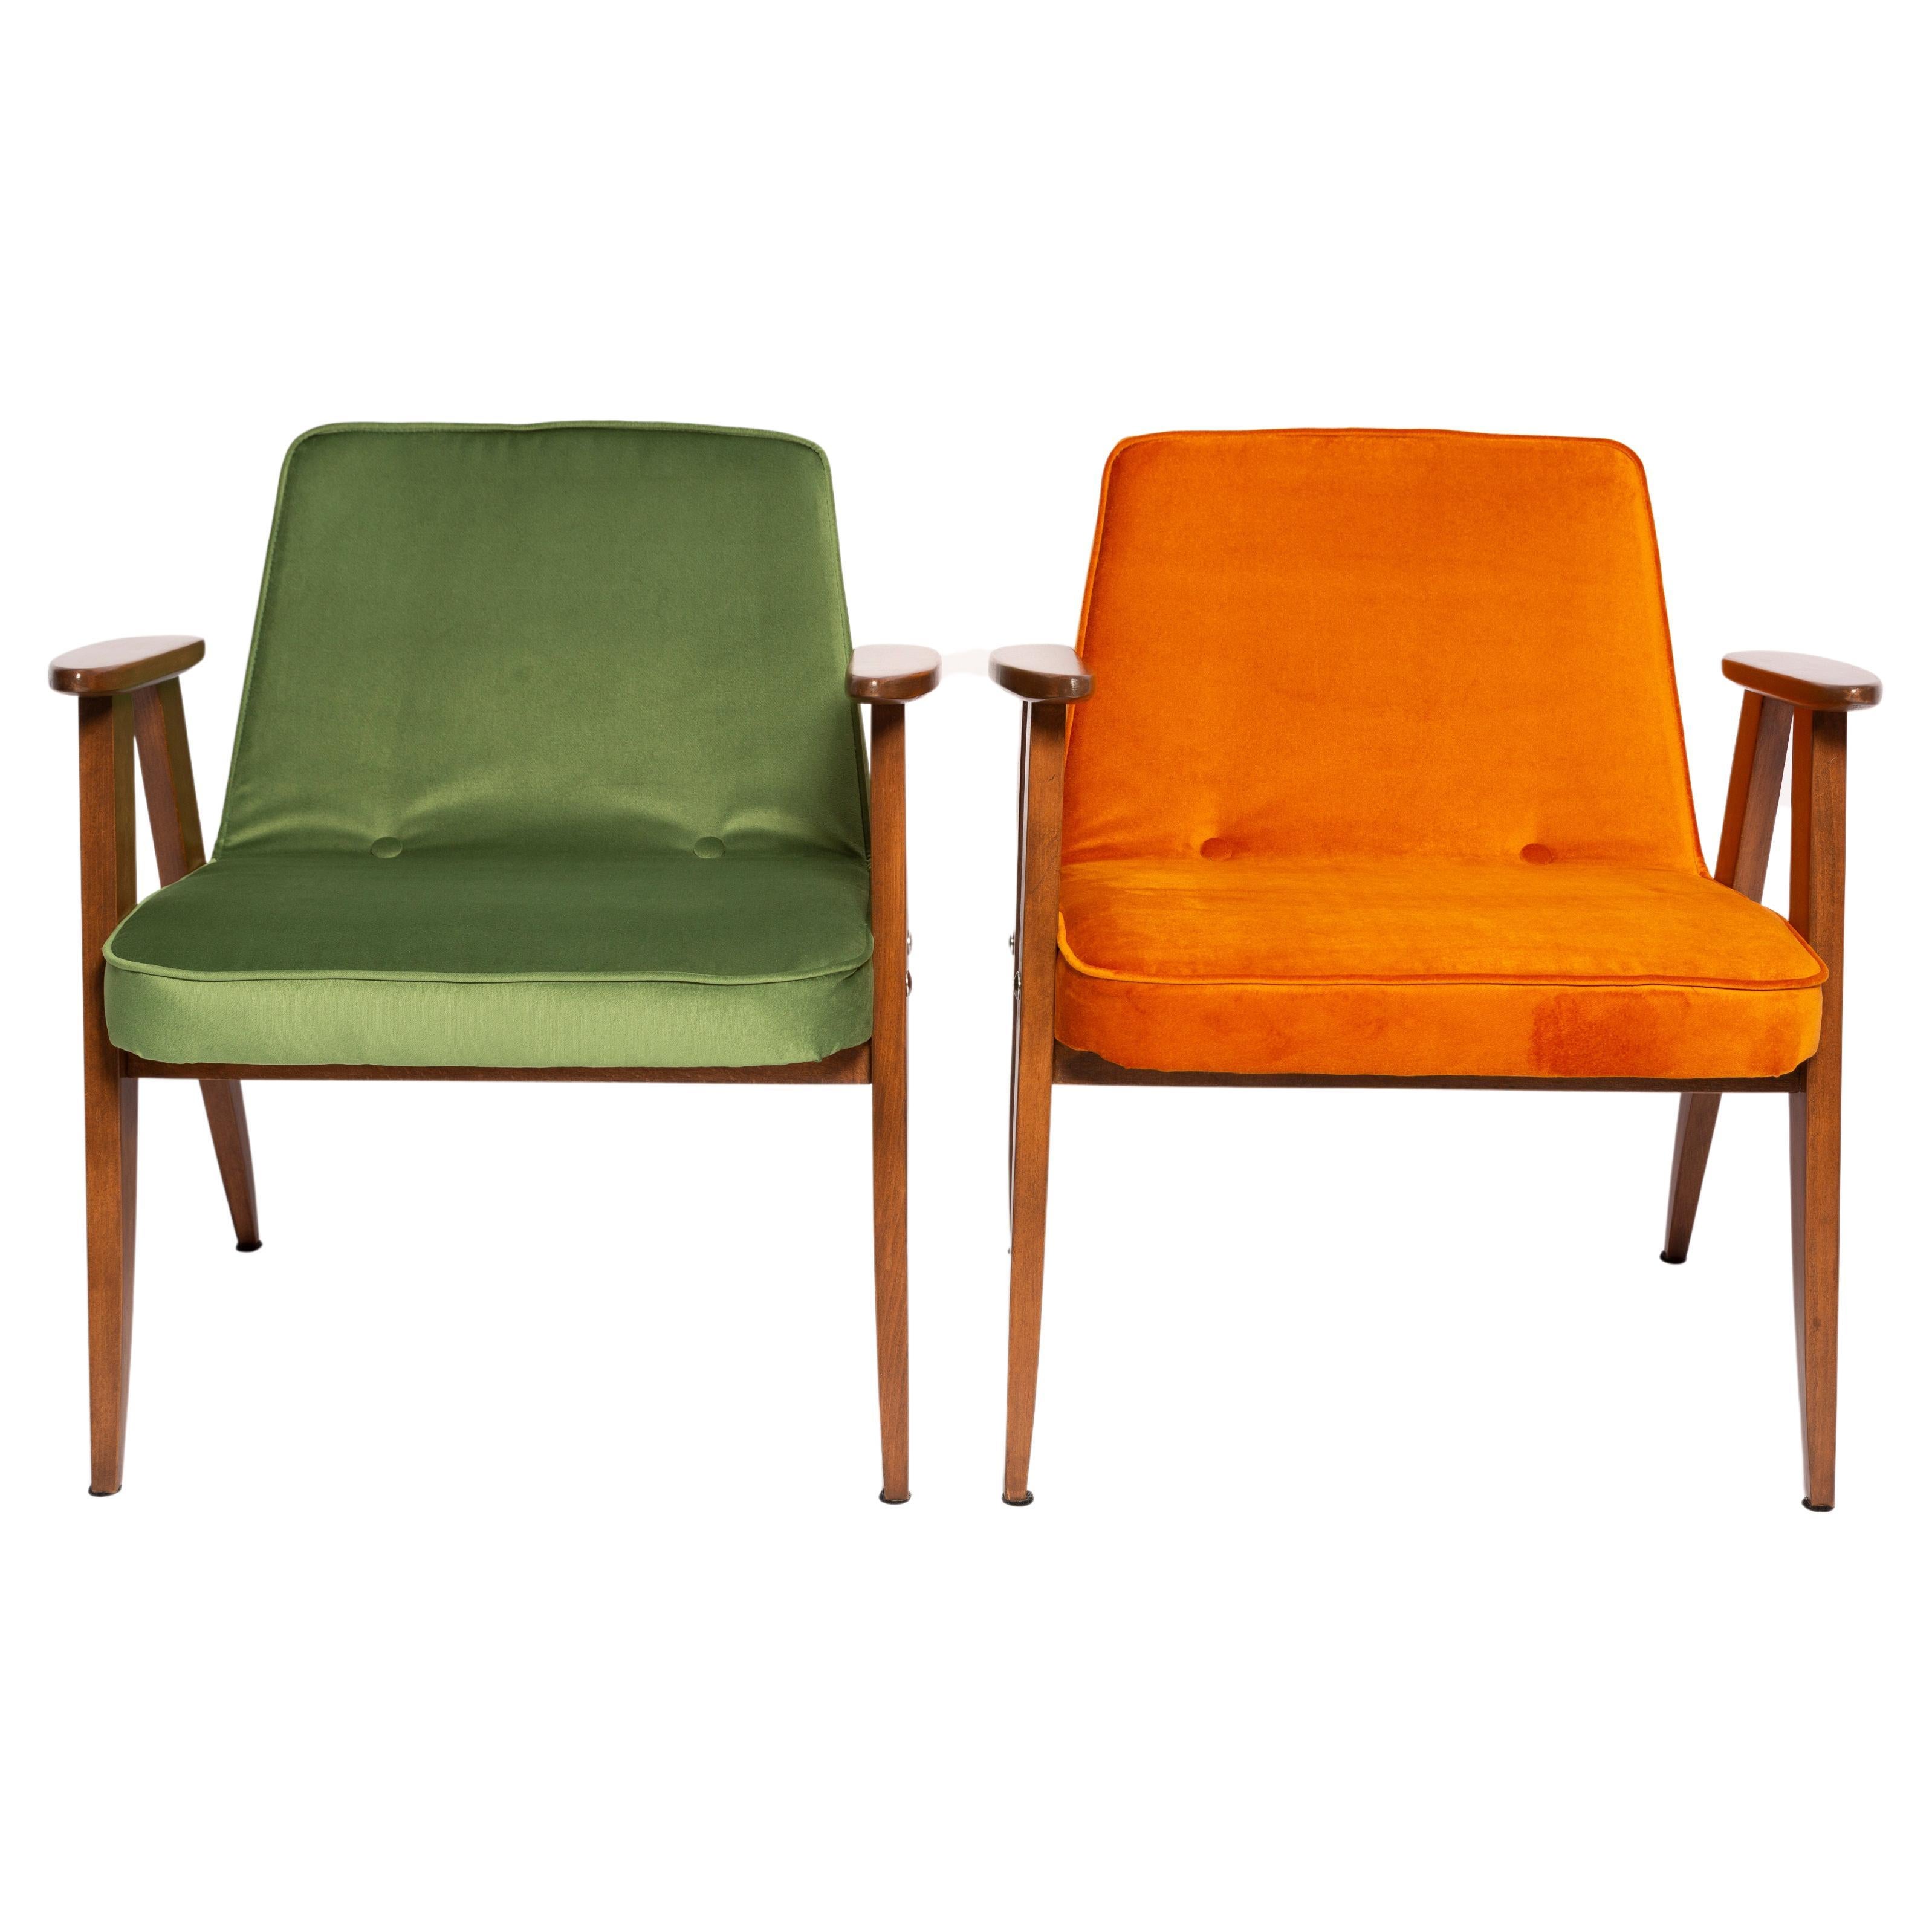 Pair of Mid-Century 366 Armchairs, Green and Orange, by Chierowski Europe, 1960s